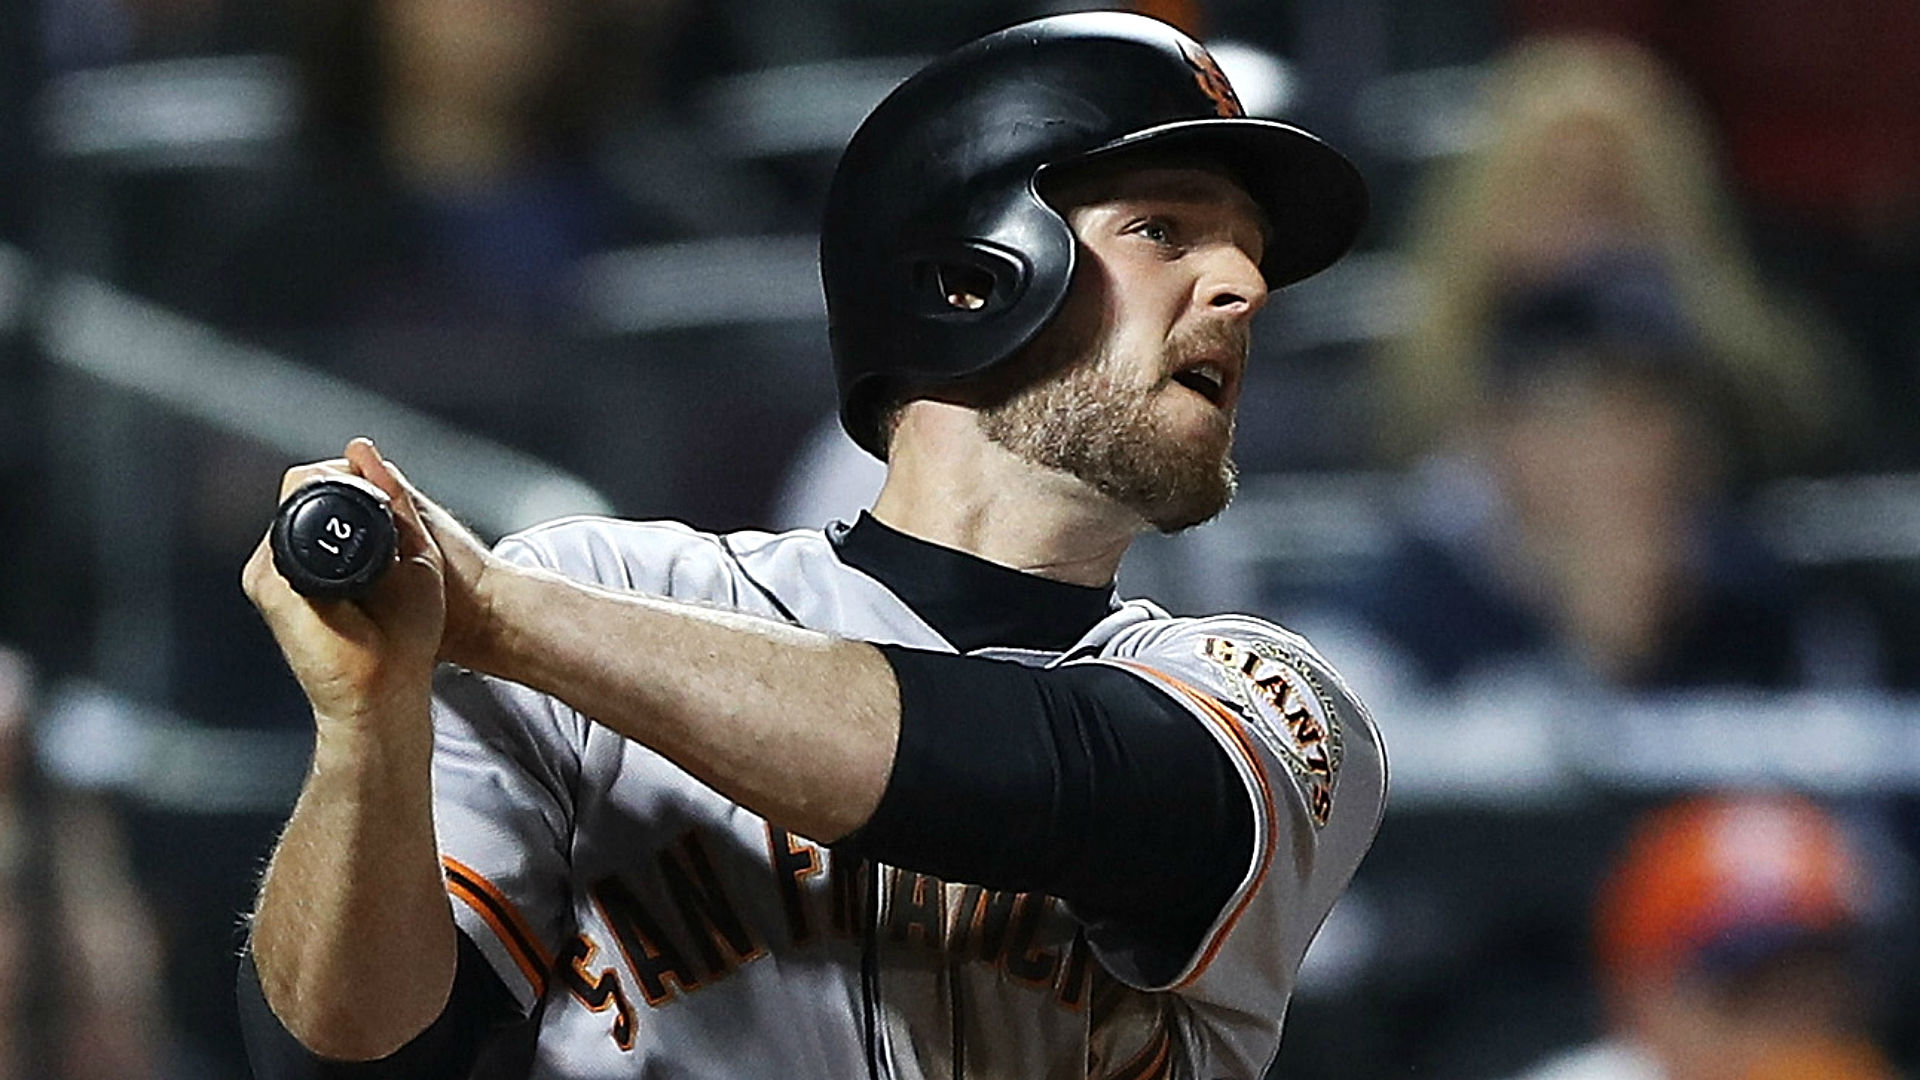 Masterful Bumgarner leads Giants to wild-card win